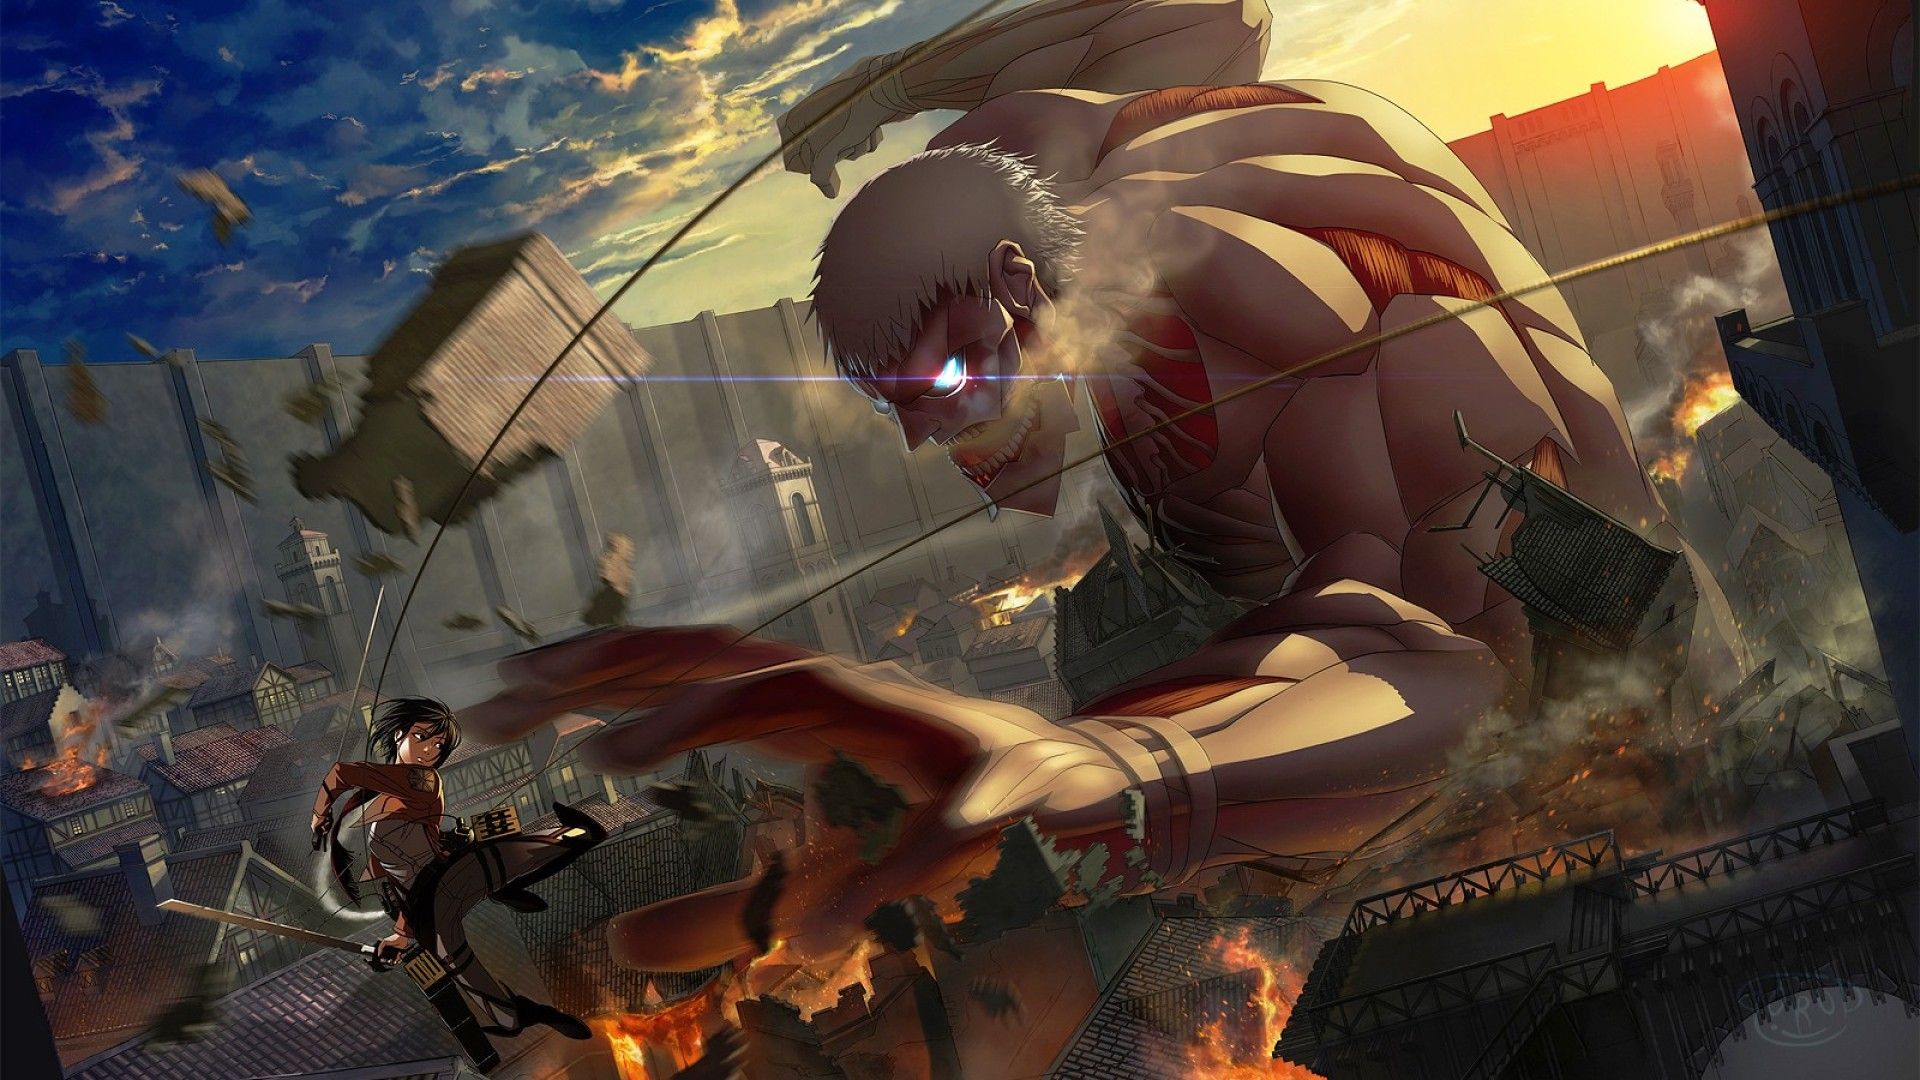 We'd fight each other again': 'Attack on Titan' final episode